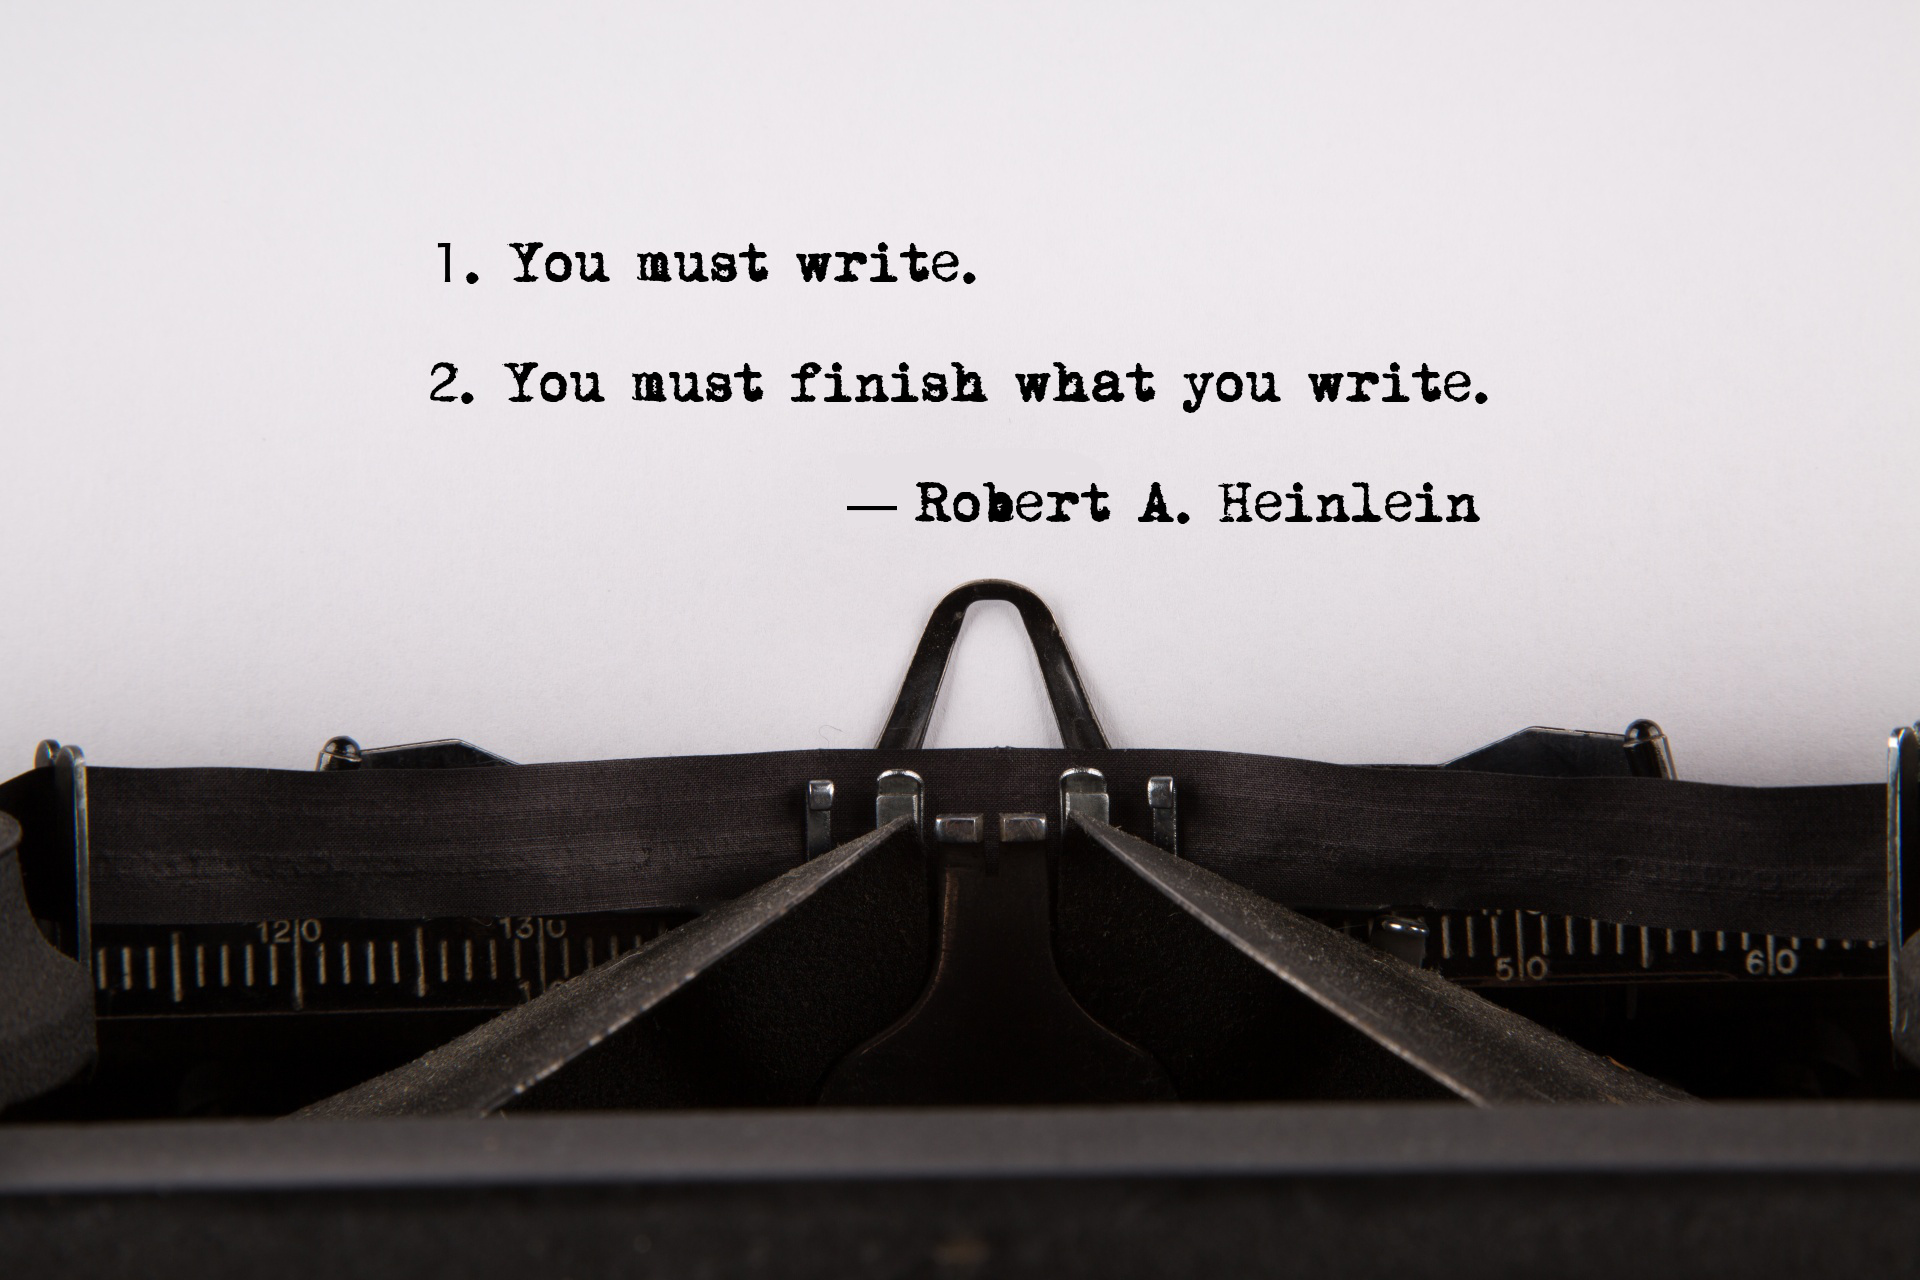 Heinlein's rules for writing